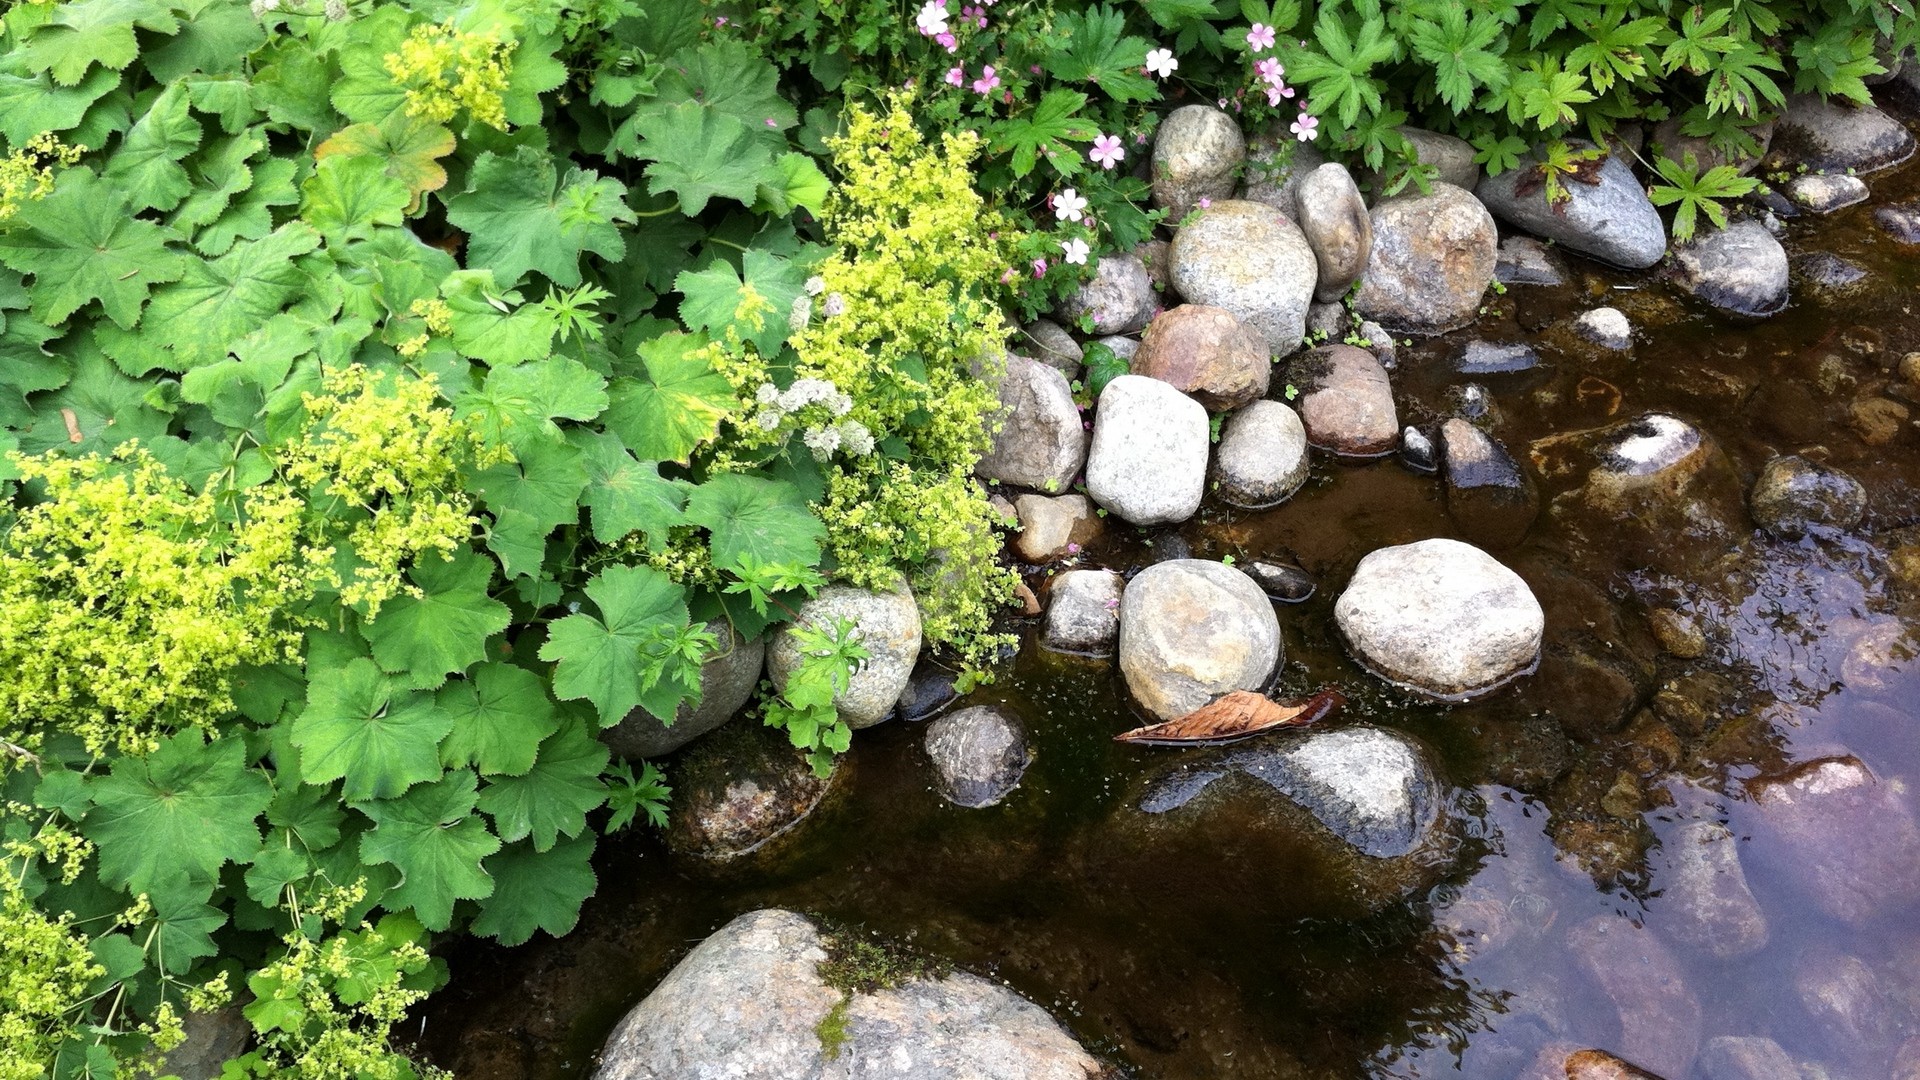 1920x1080 wallpapers: stones, plants, water, nature (image)